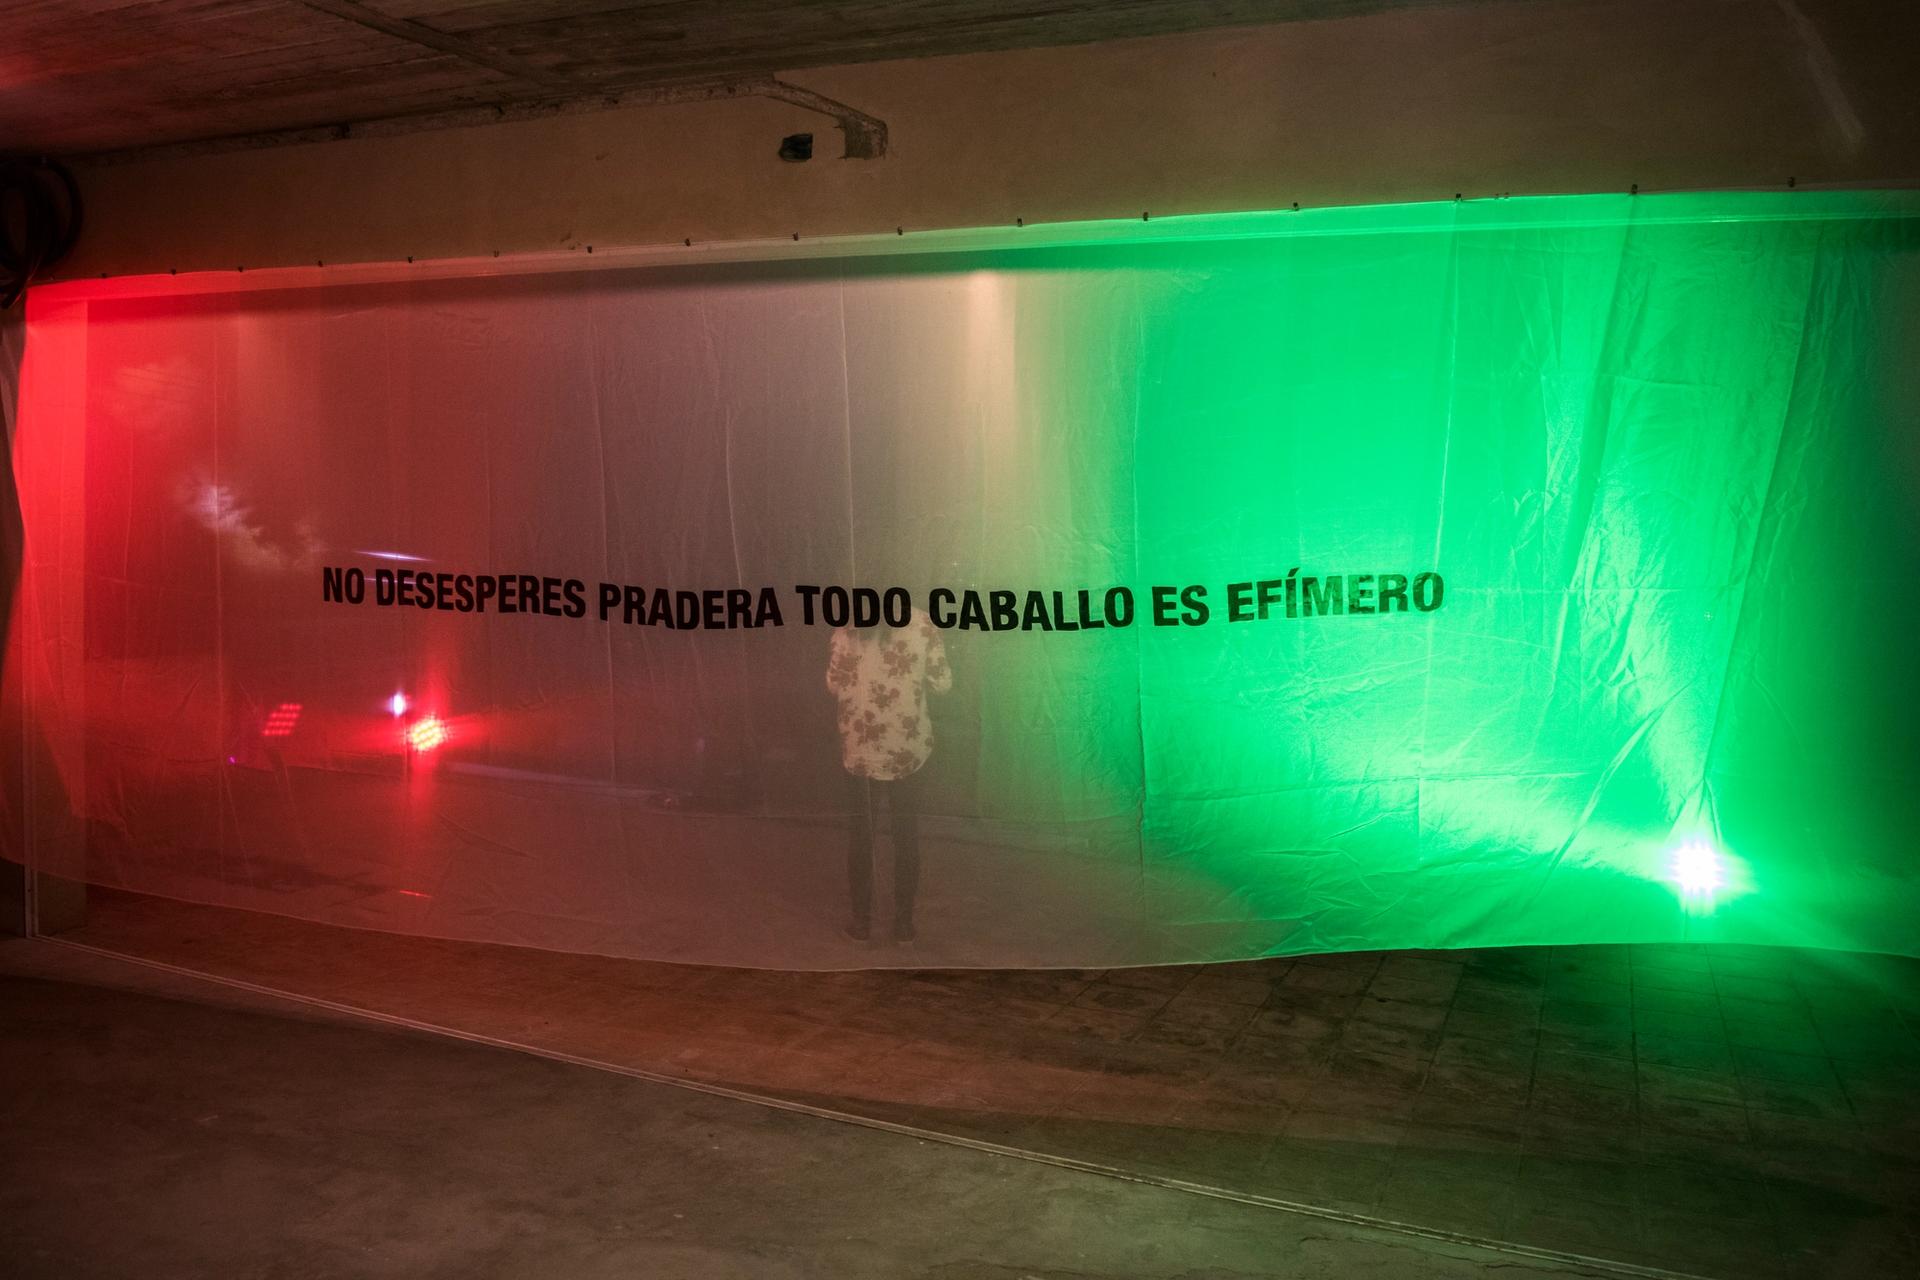 Reynier Leyva Novo and Aryam Rodriguez's  No desesperes pradera… (Don’t despair meadow…), exhibited during the first edition of Havana Art Weekend in 2017. Photo by Jorge Calcagno, courtesy of Havana Art Weekend.